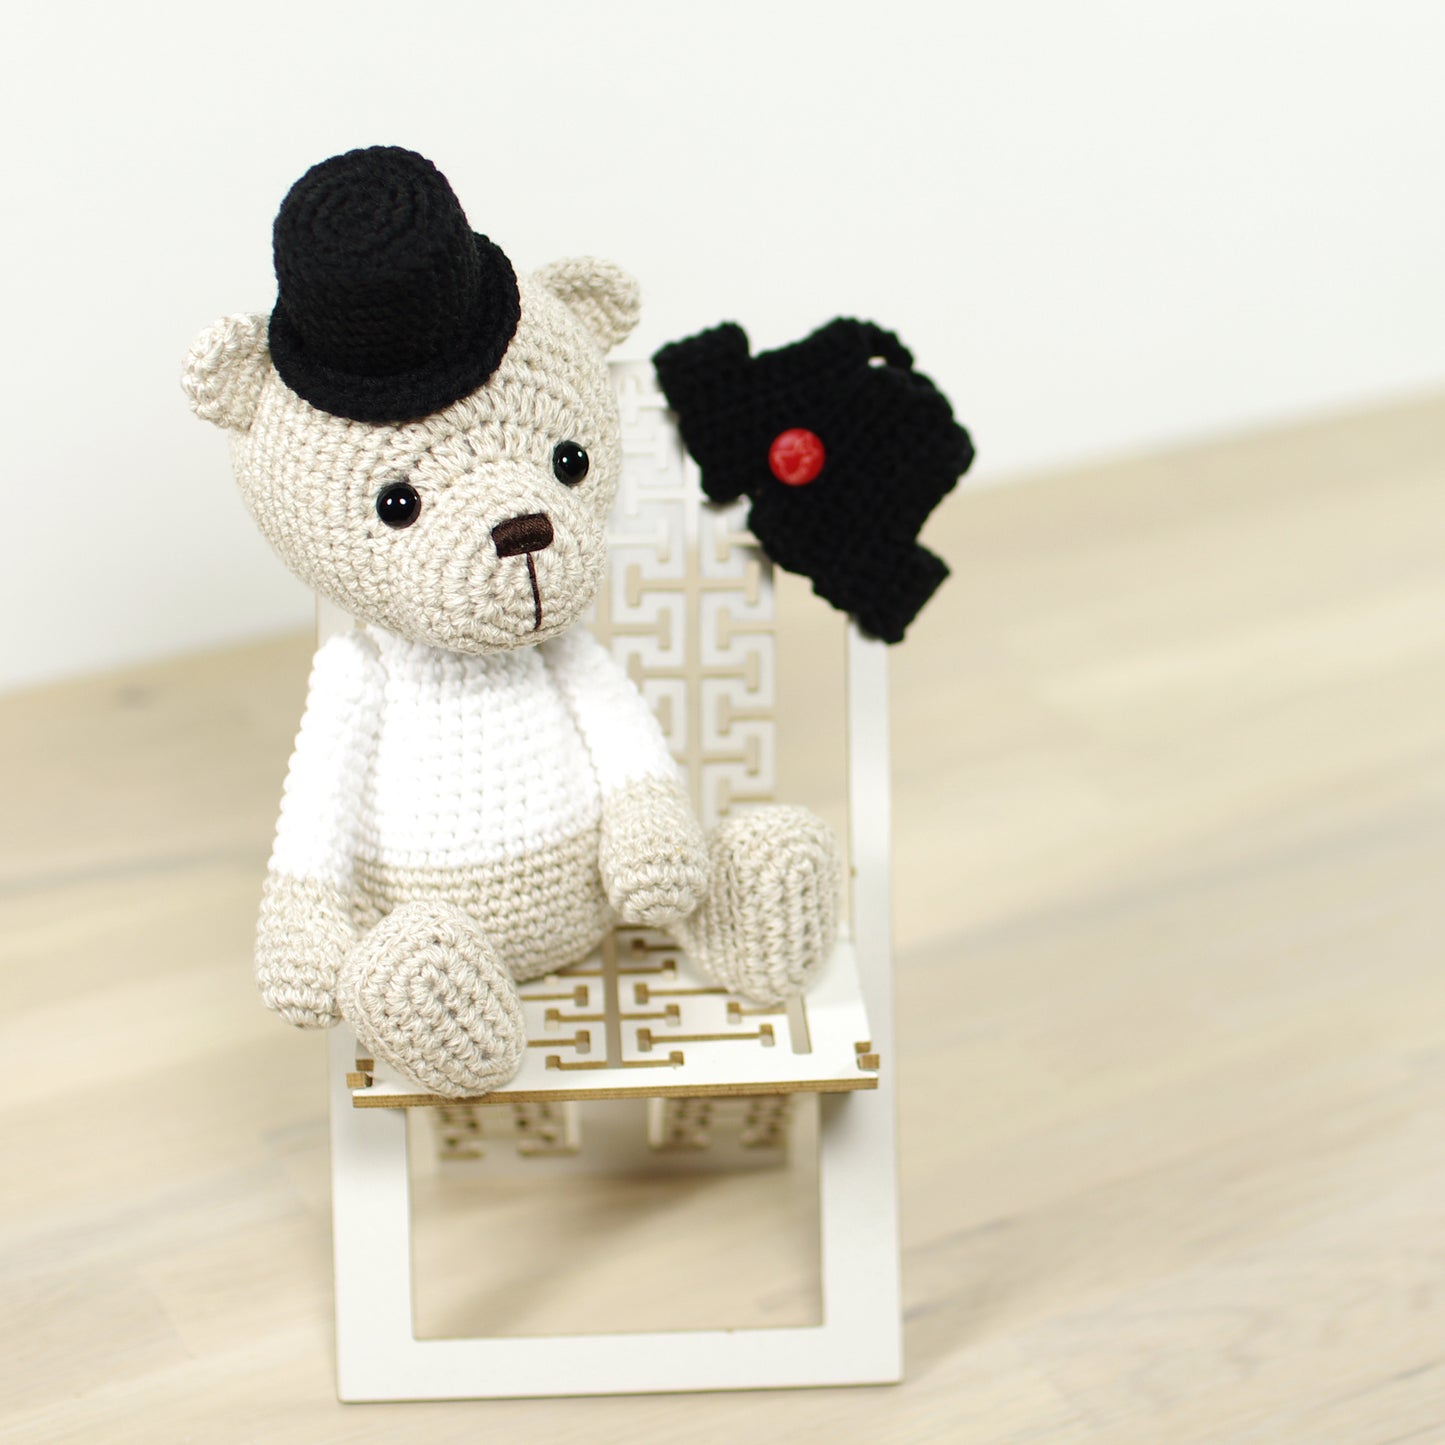 PATTERN: Teddy Bear in a Top Hat and Vest